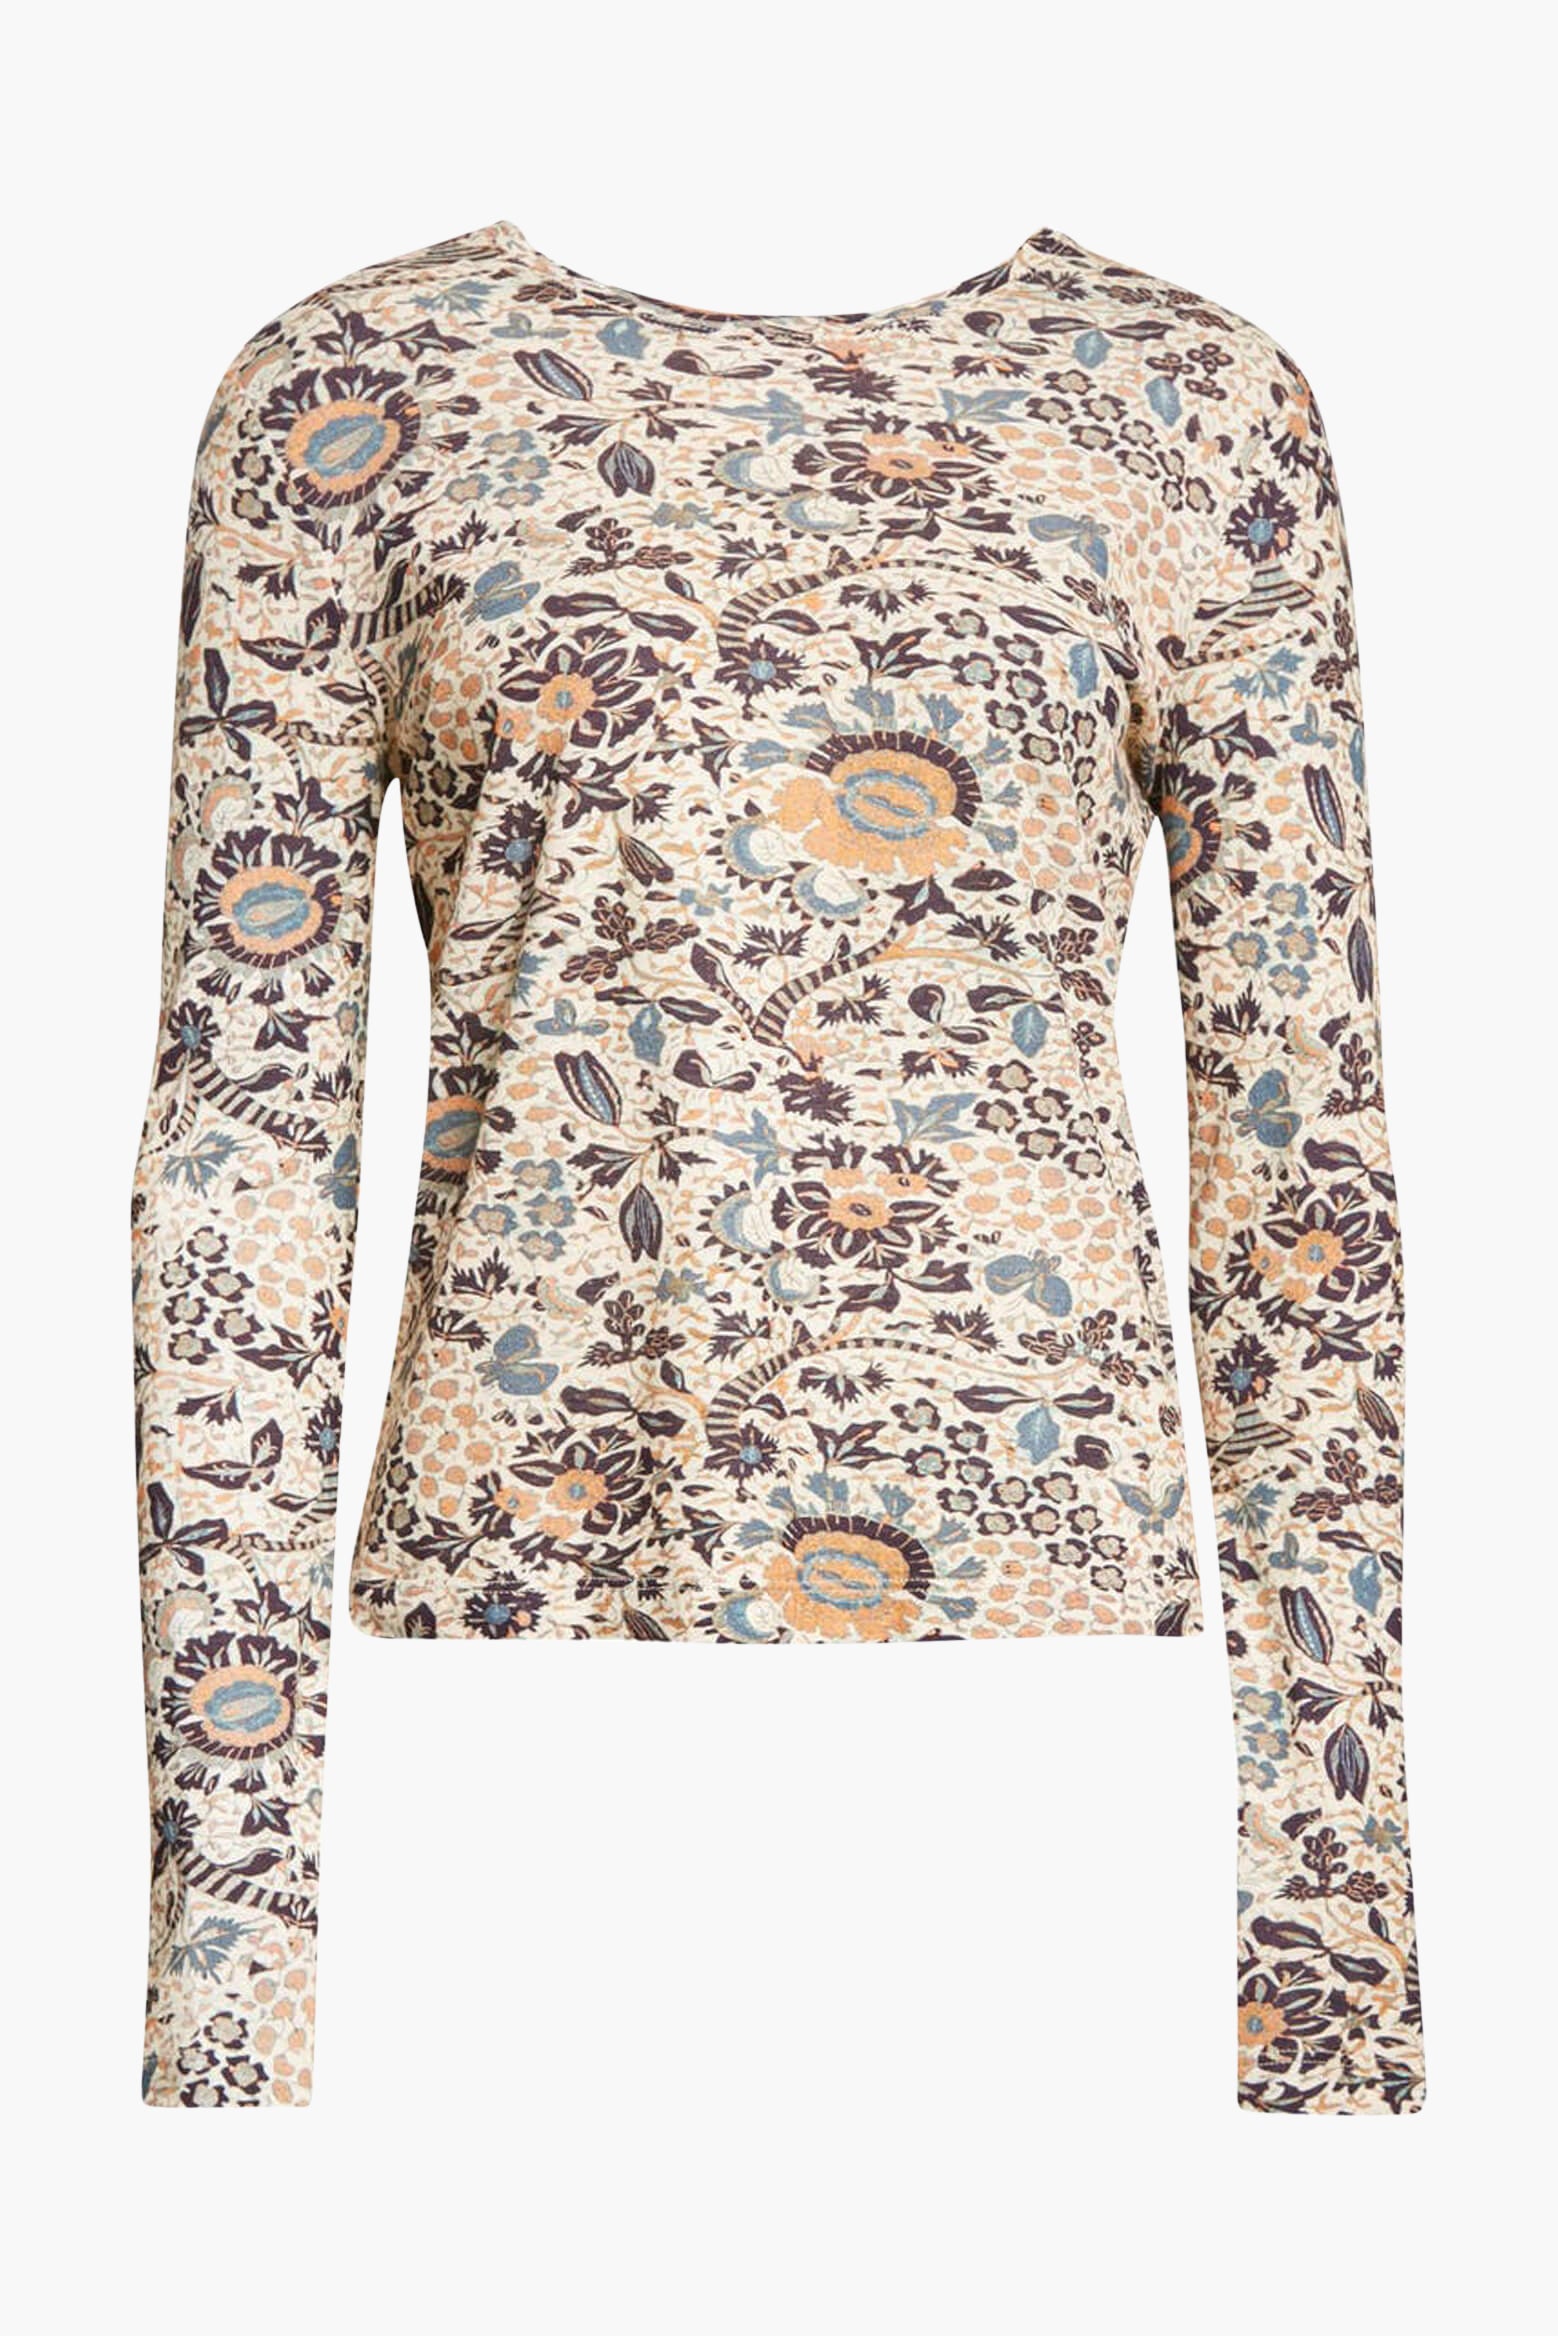 Ulla Johnson Eve Top in Clematis available at TNT The New Trend Australia.